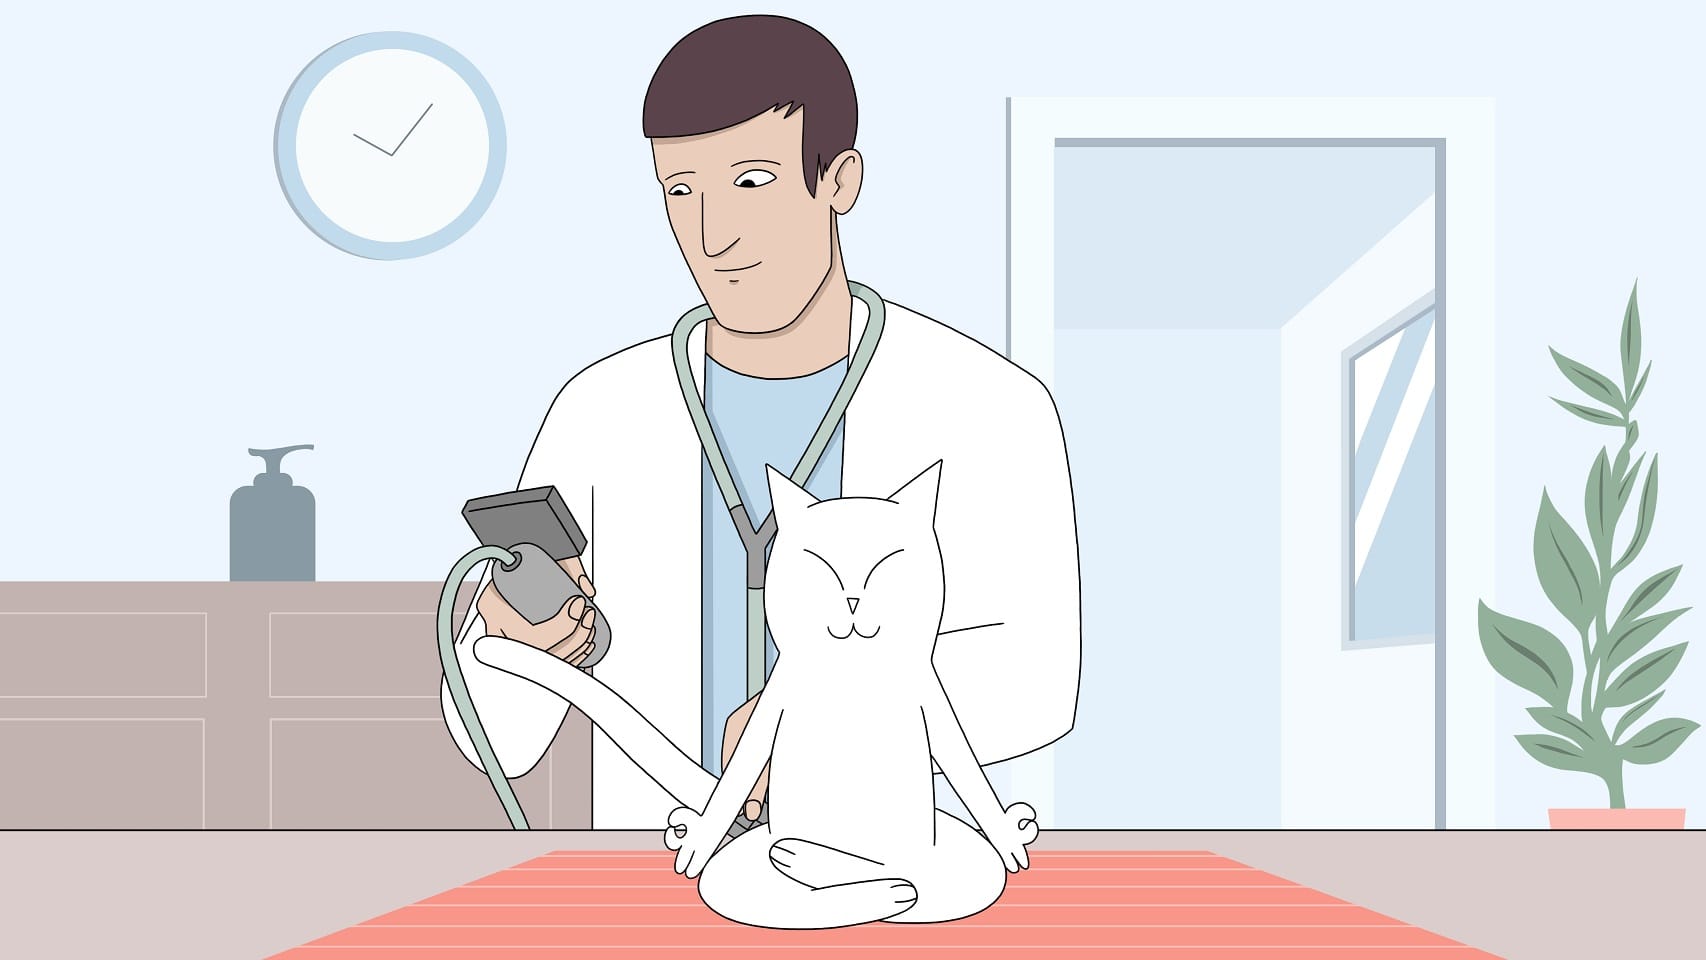 The cat is zen when the vet takes his blood pressure